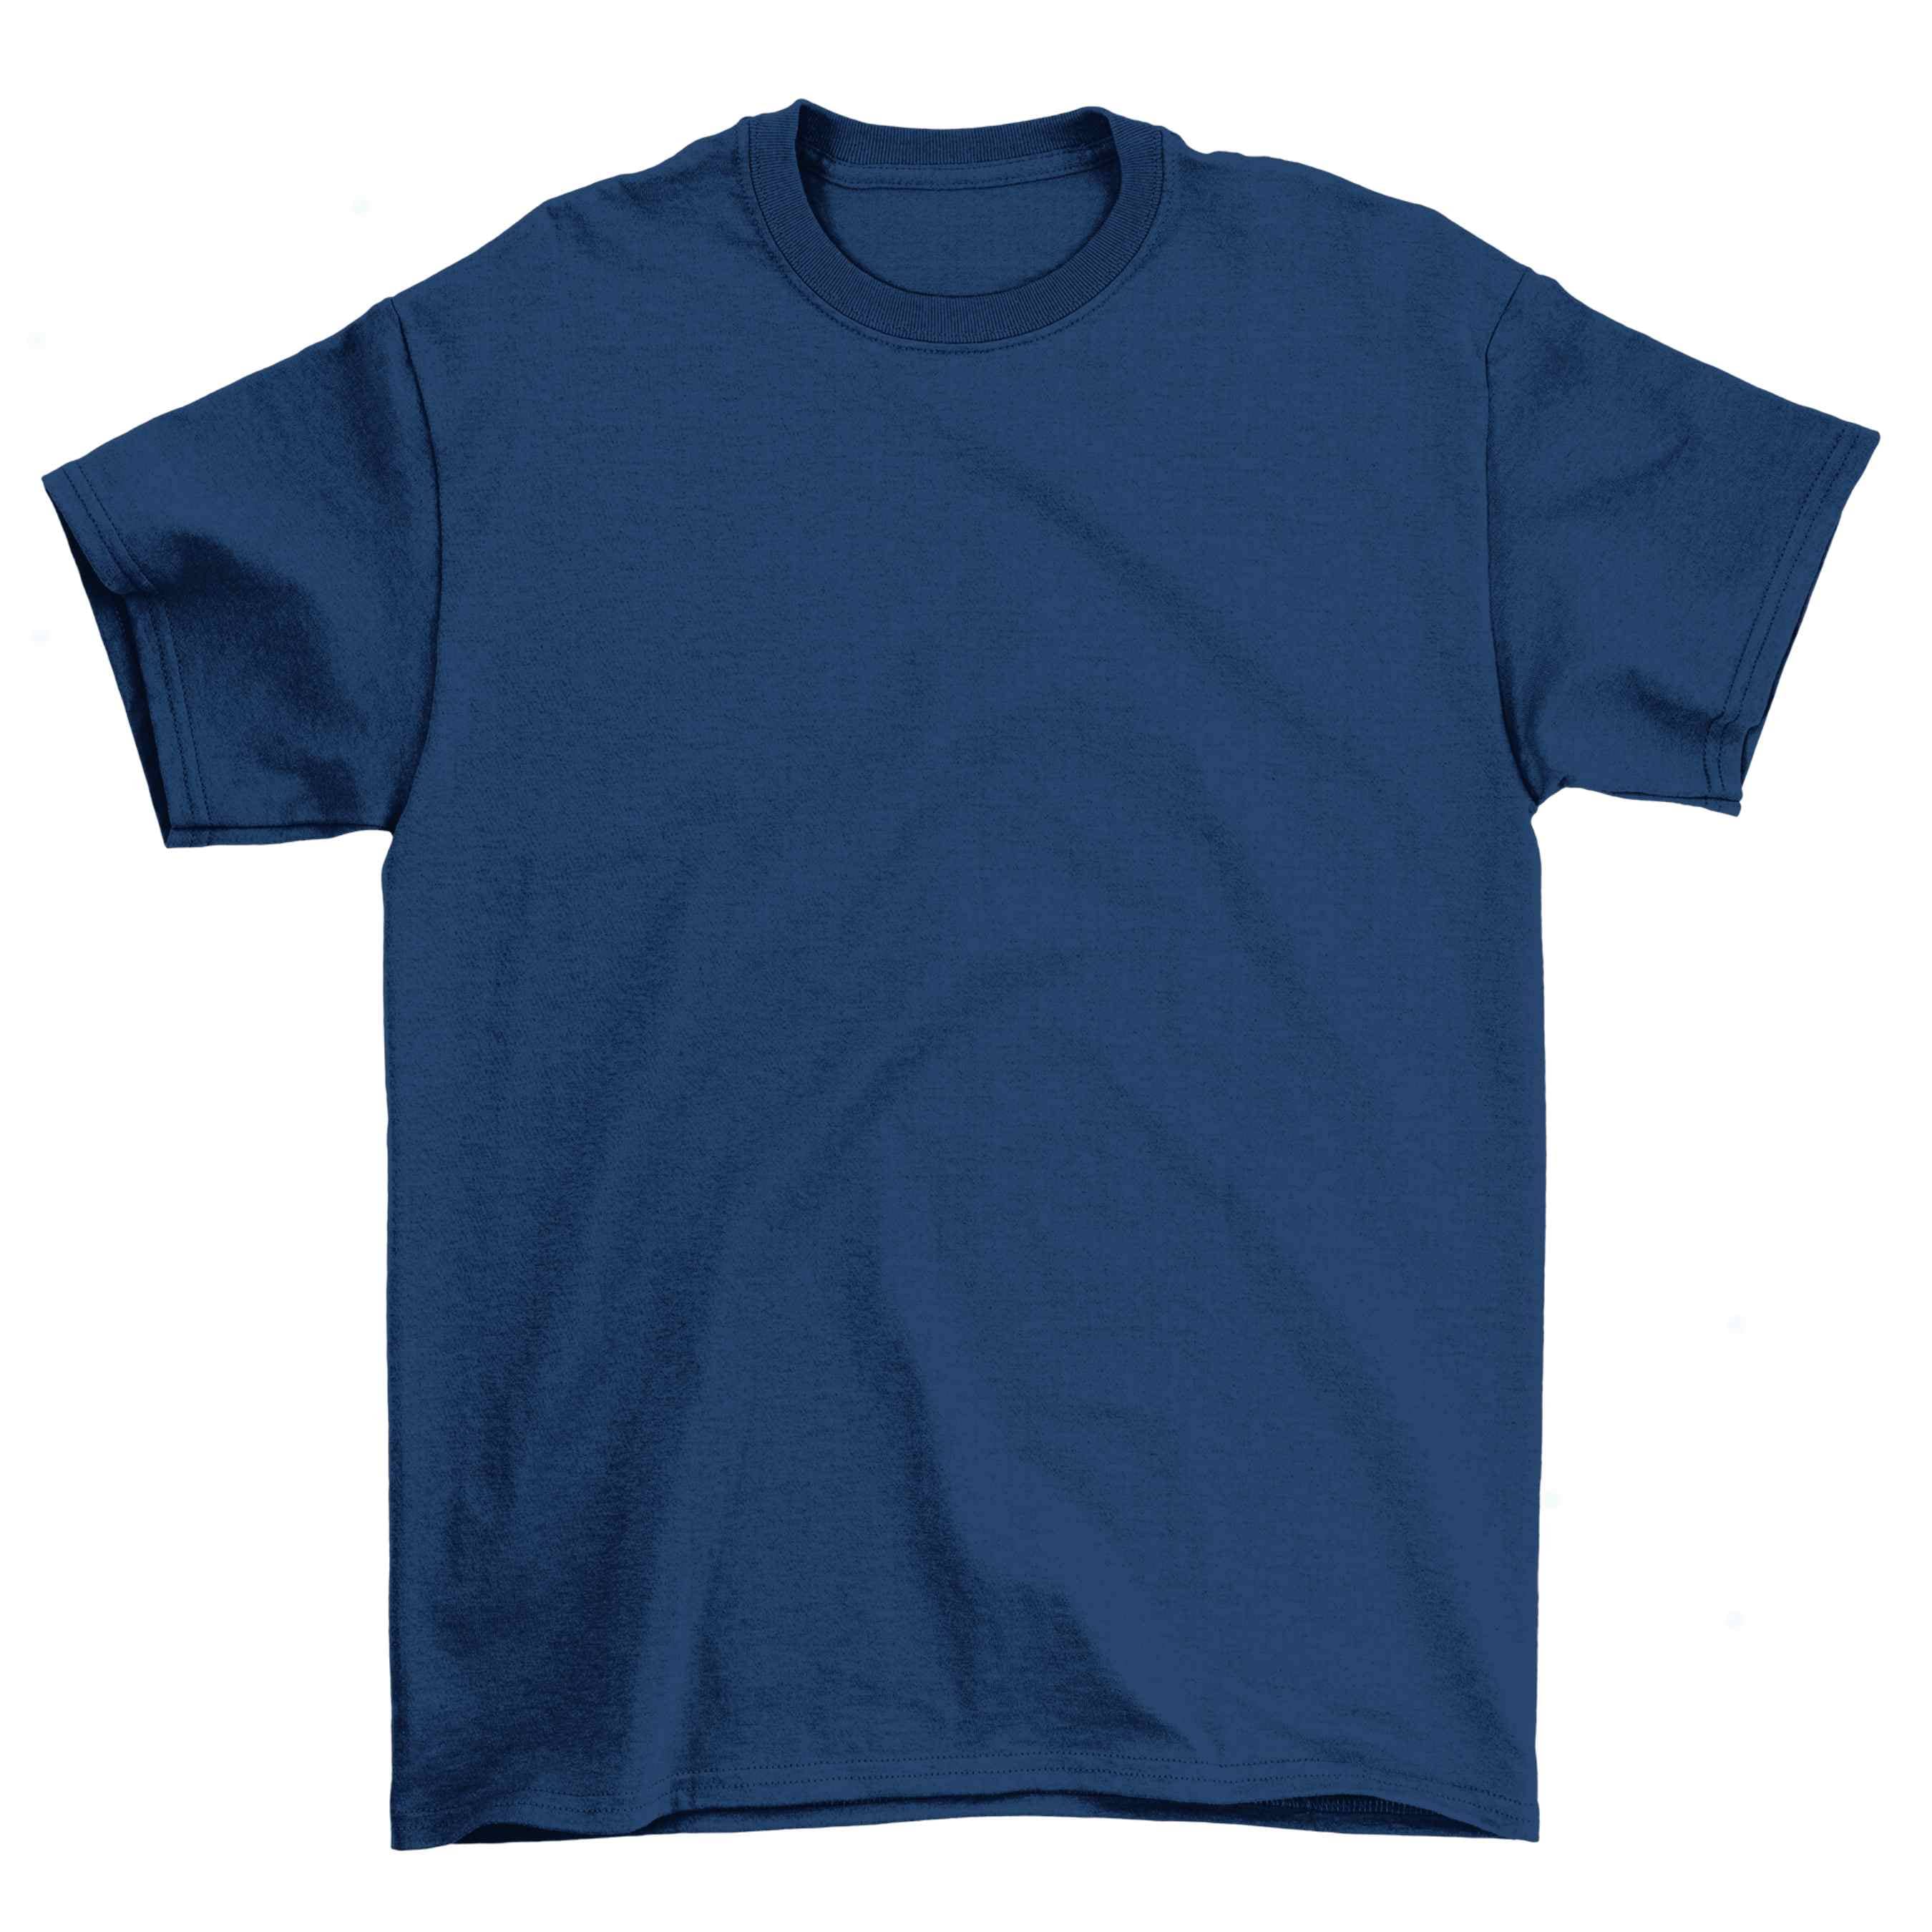 Classic Tees for Men - Classic Tees for Women